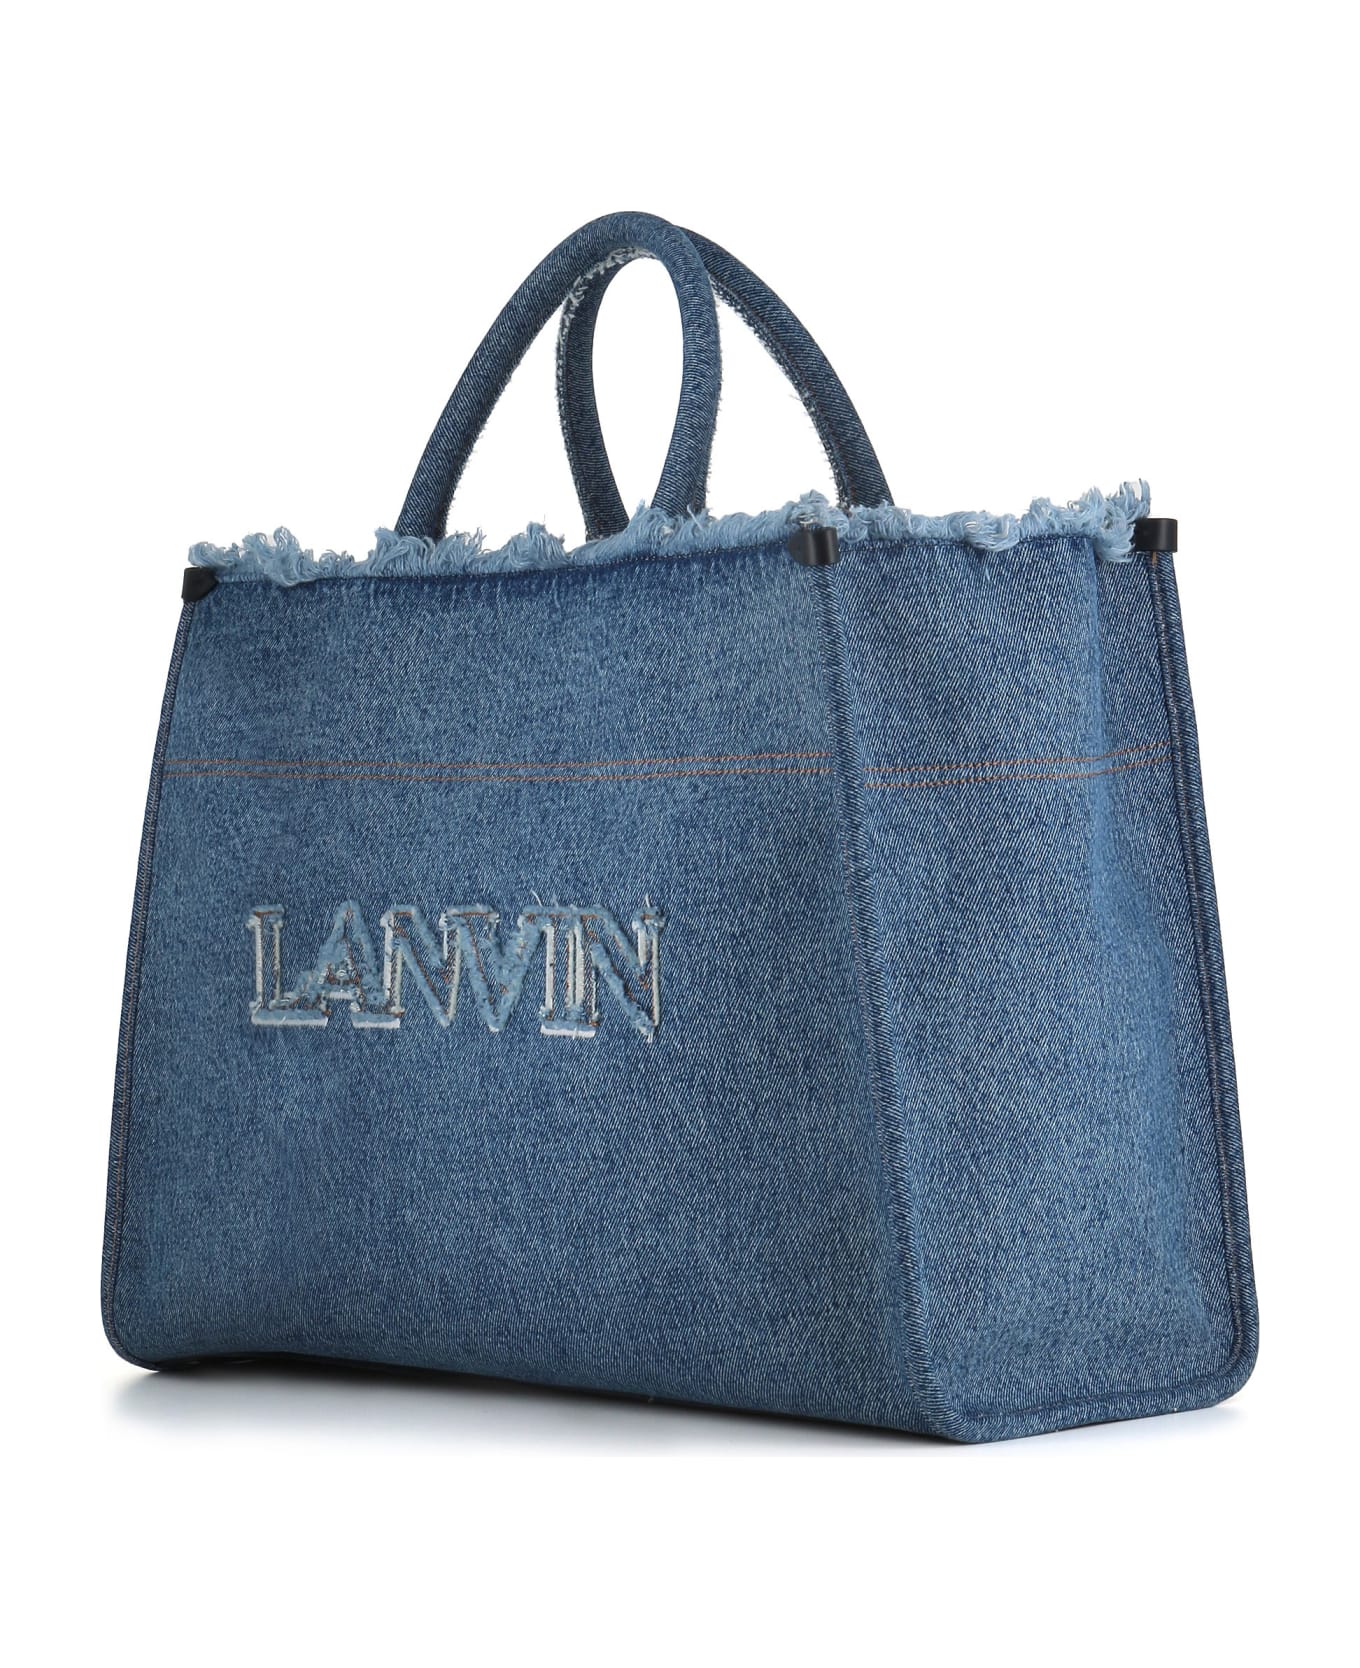 Lanvin In&out Mm Tote Bag - Blue